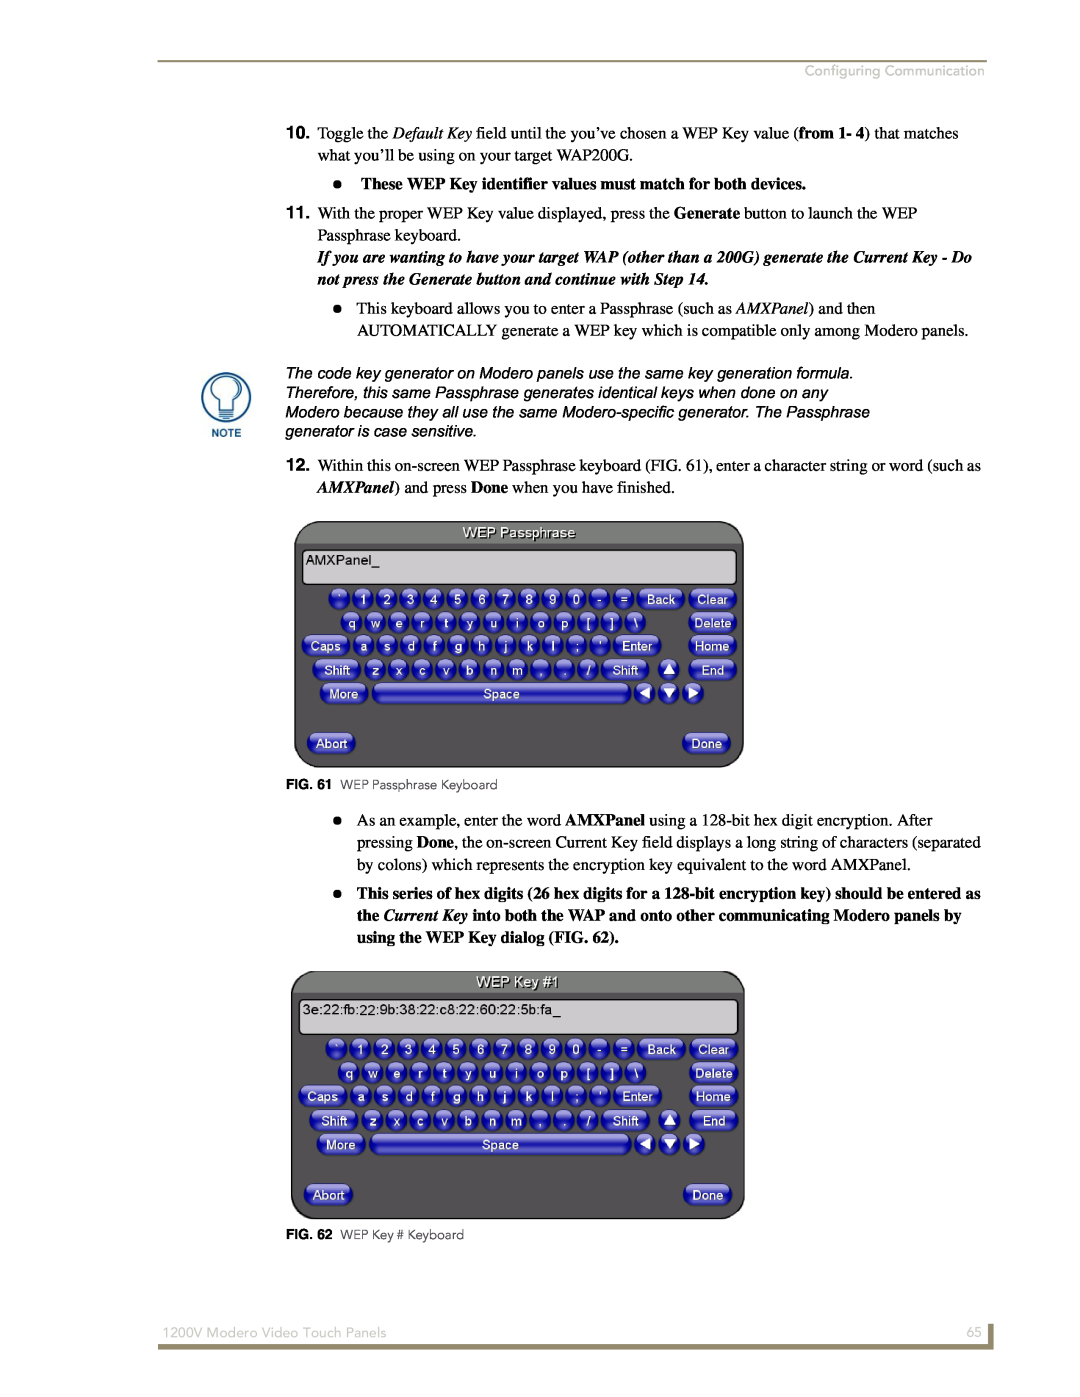 AMX NXT-1200V These WEP Key identifier values must match for both devices, WEP Passphrase Keyboard, WEP Key # Keyboard 